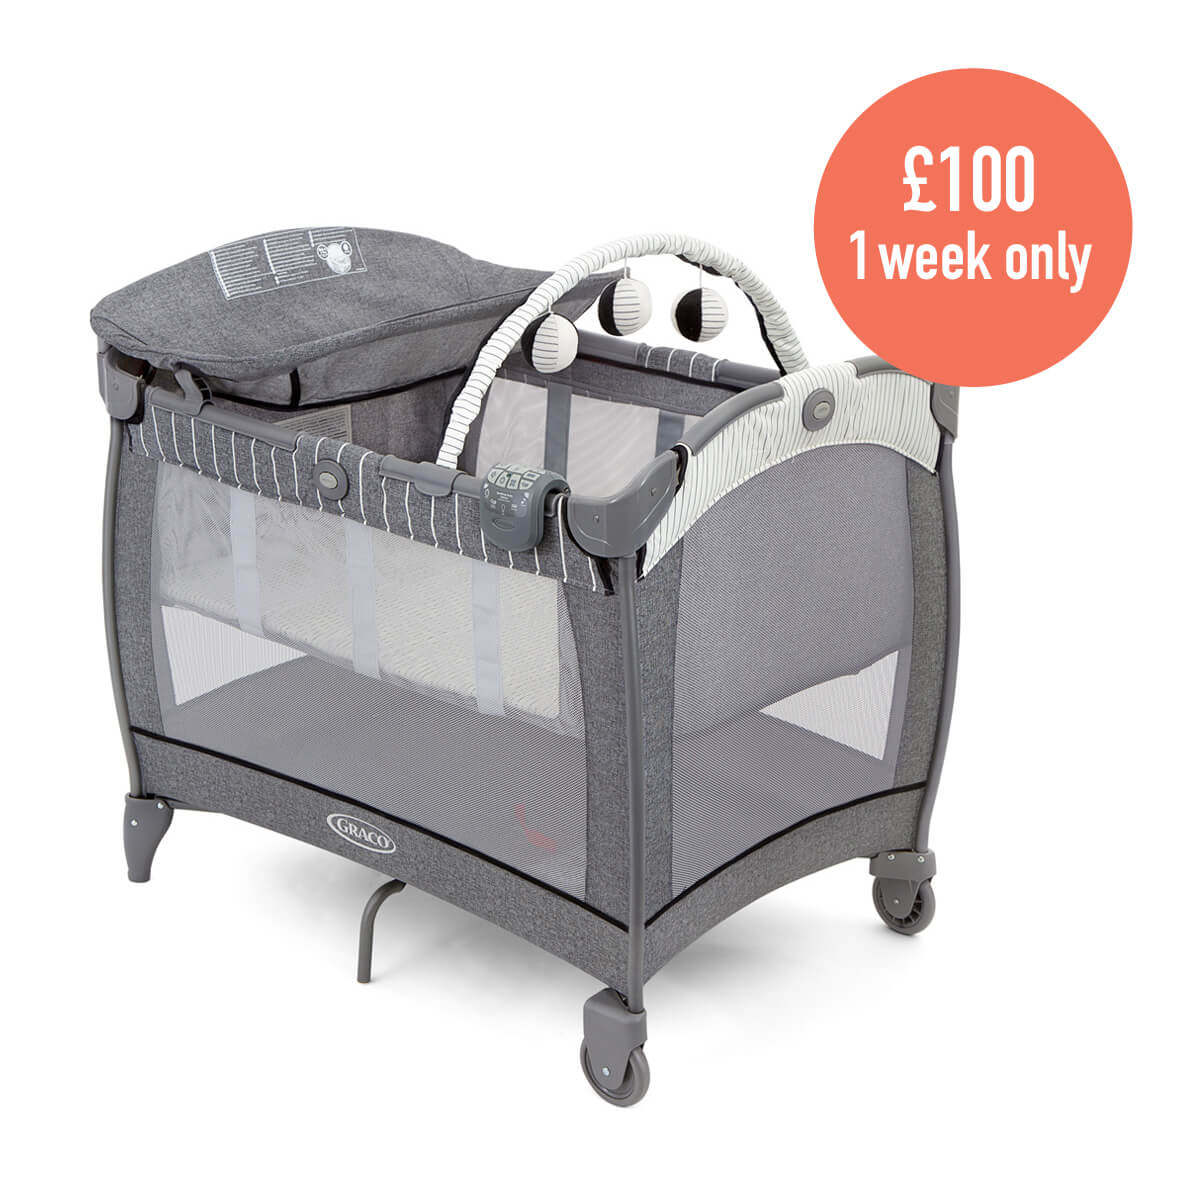 Graco Contour® Electra with removable bassinet and changing table three quarter angle with 100 1 week only text